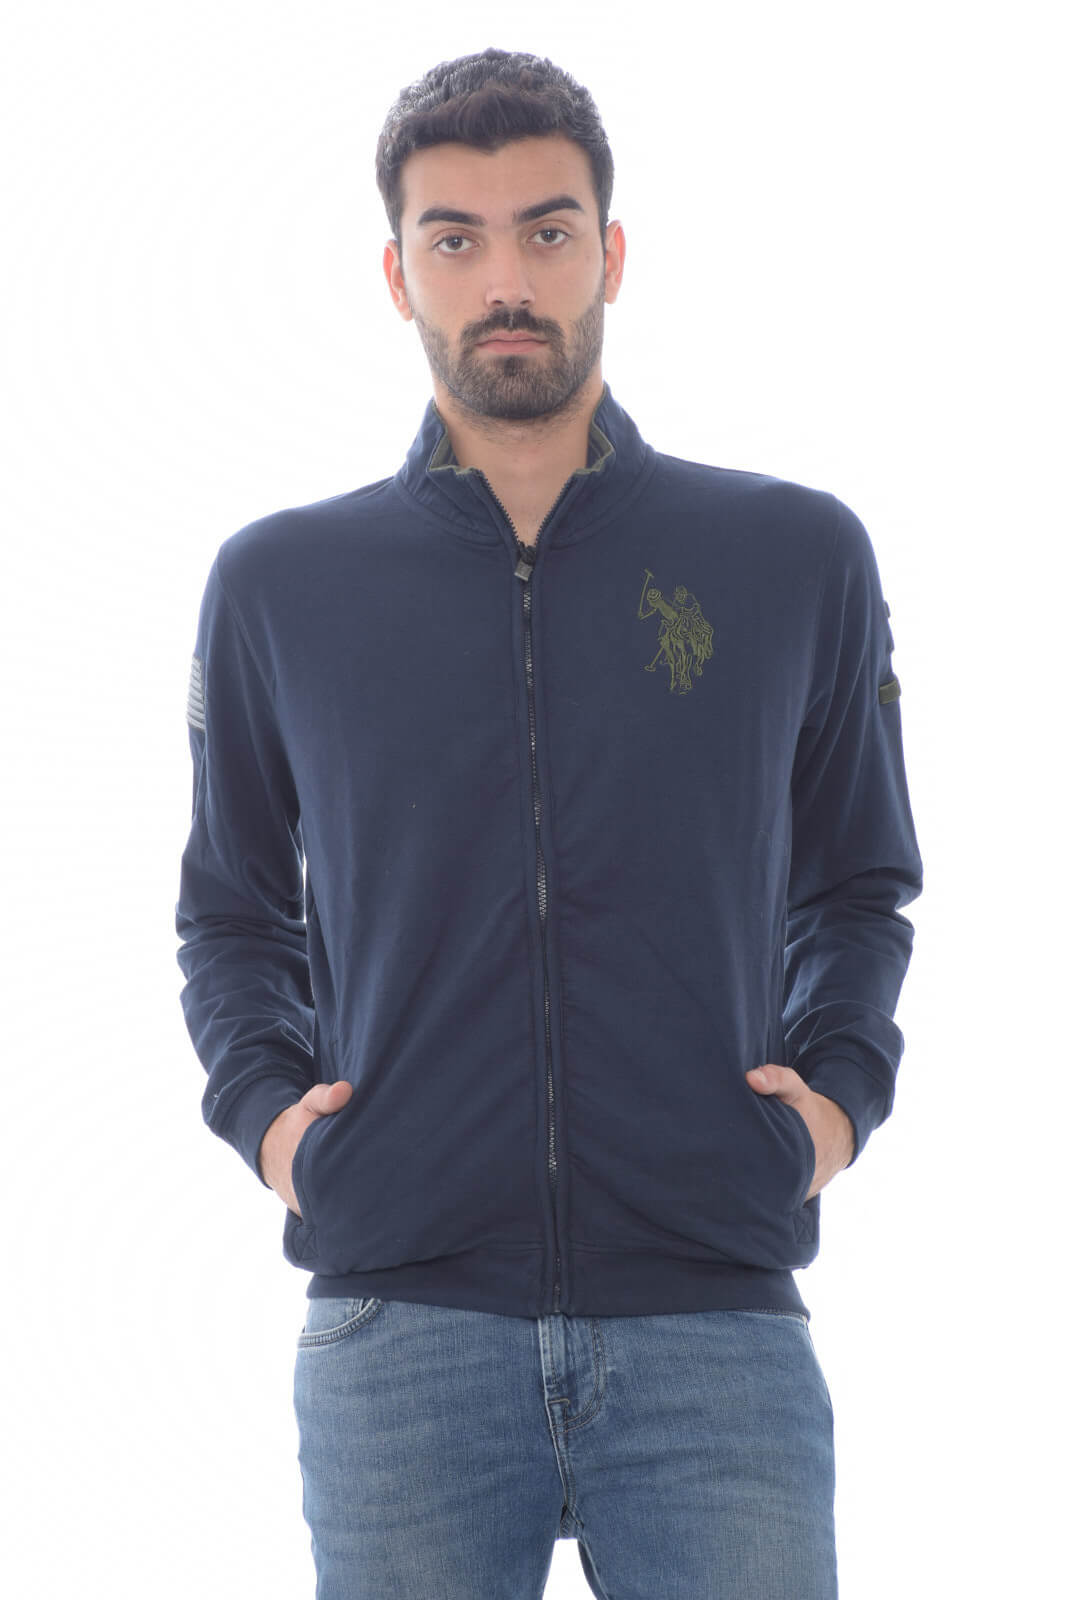 US POLO ASSN Men's sweatshirt with embroidered logo